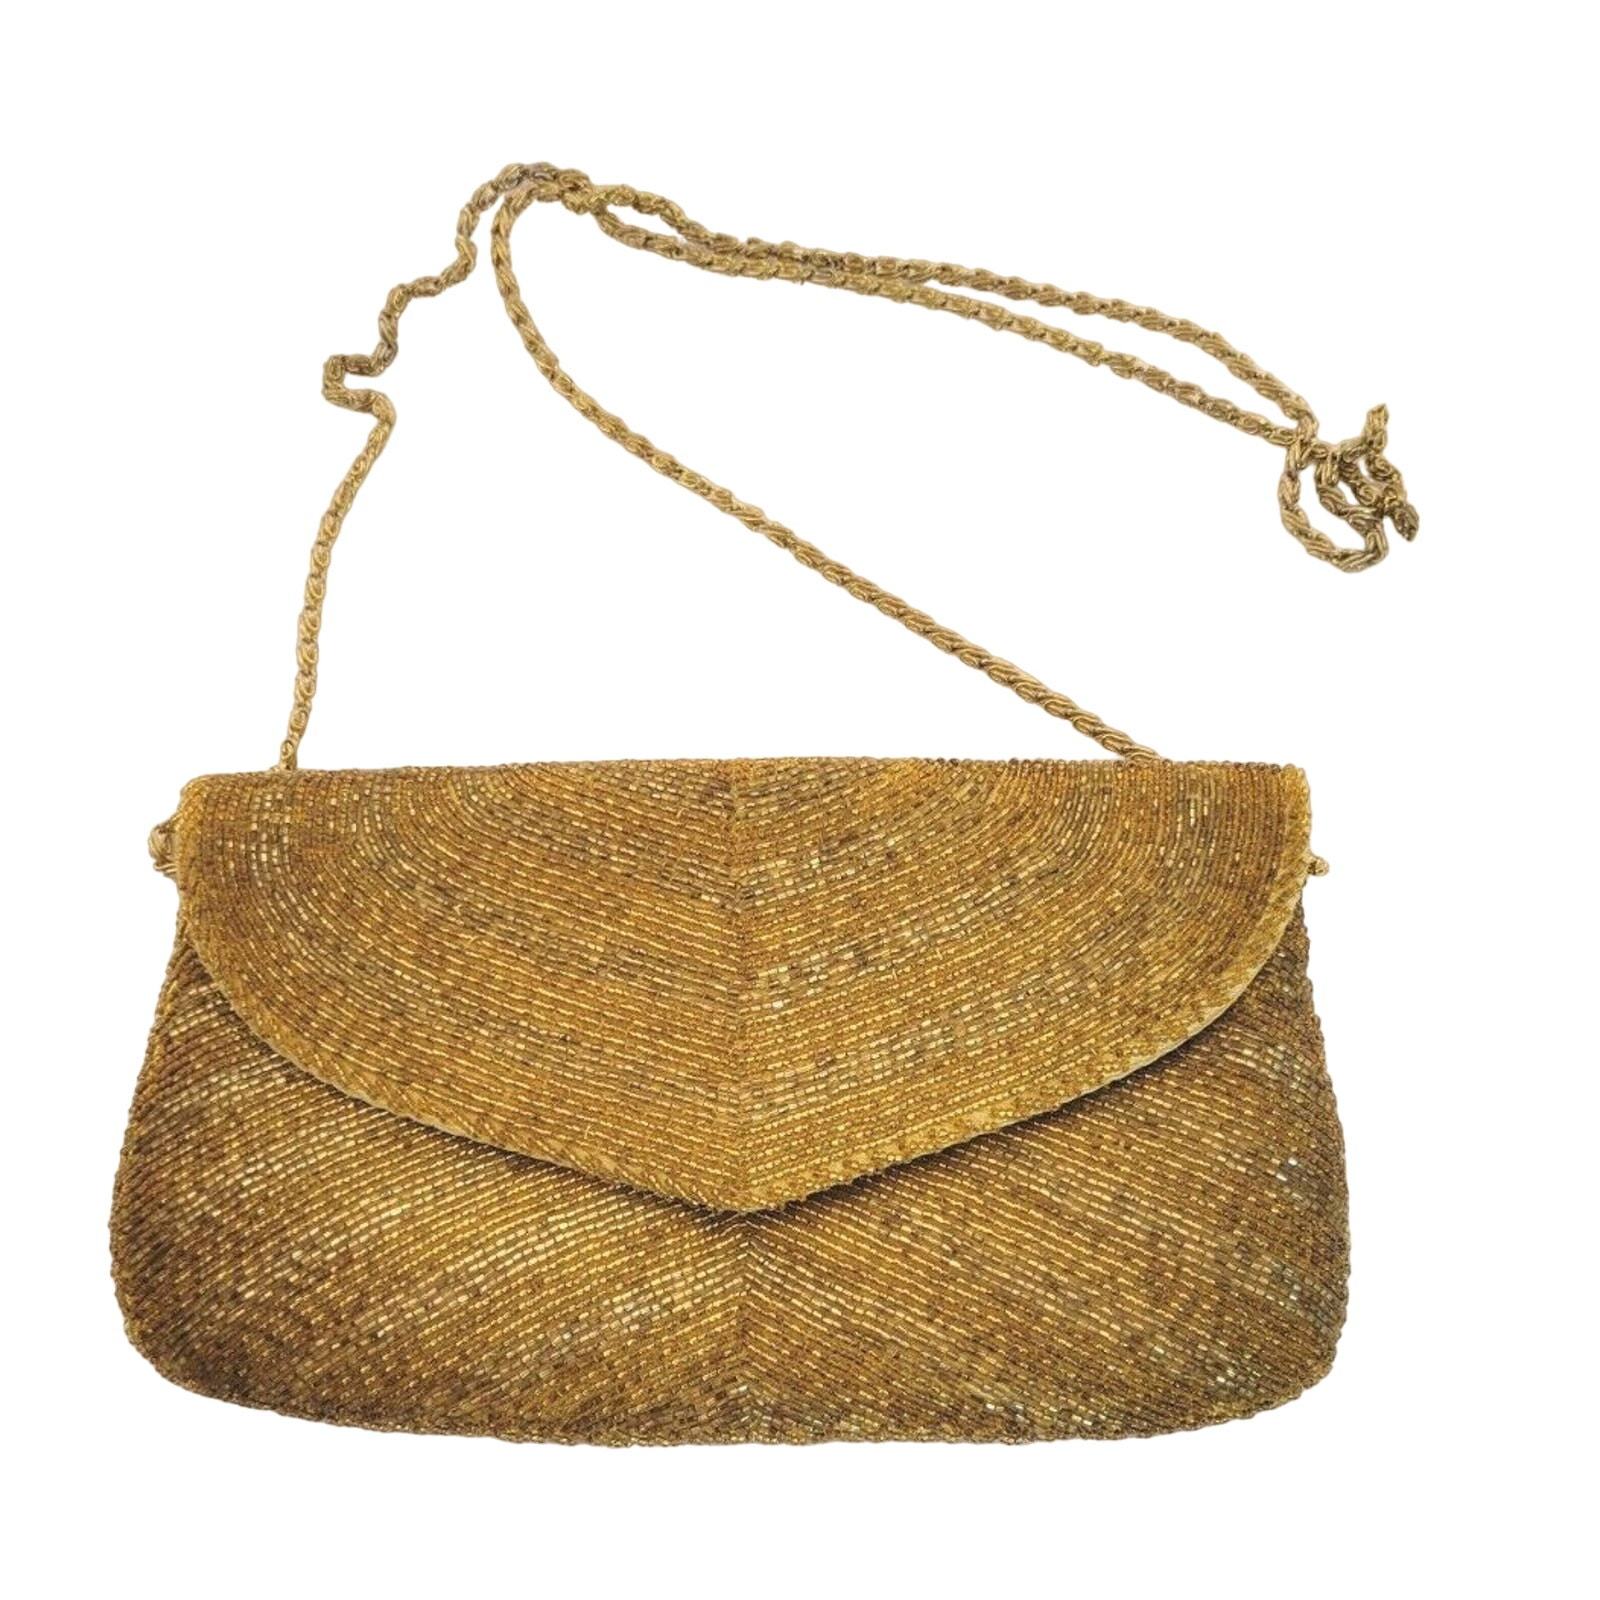 Primary image for DeLill Gold Beaded Satin Rayon Blend Purse Bag Vintage Glamour Handmade In Macau